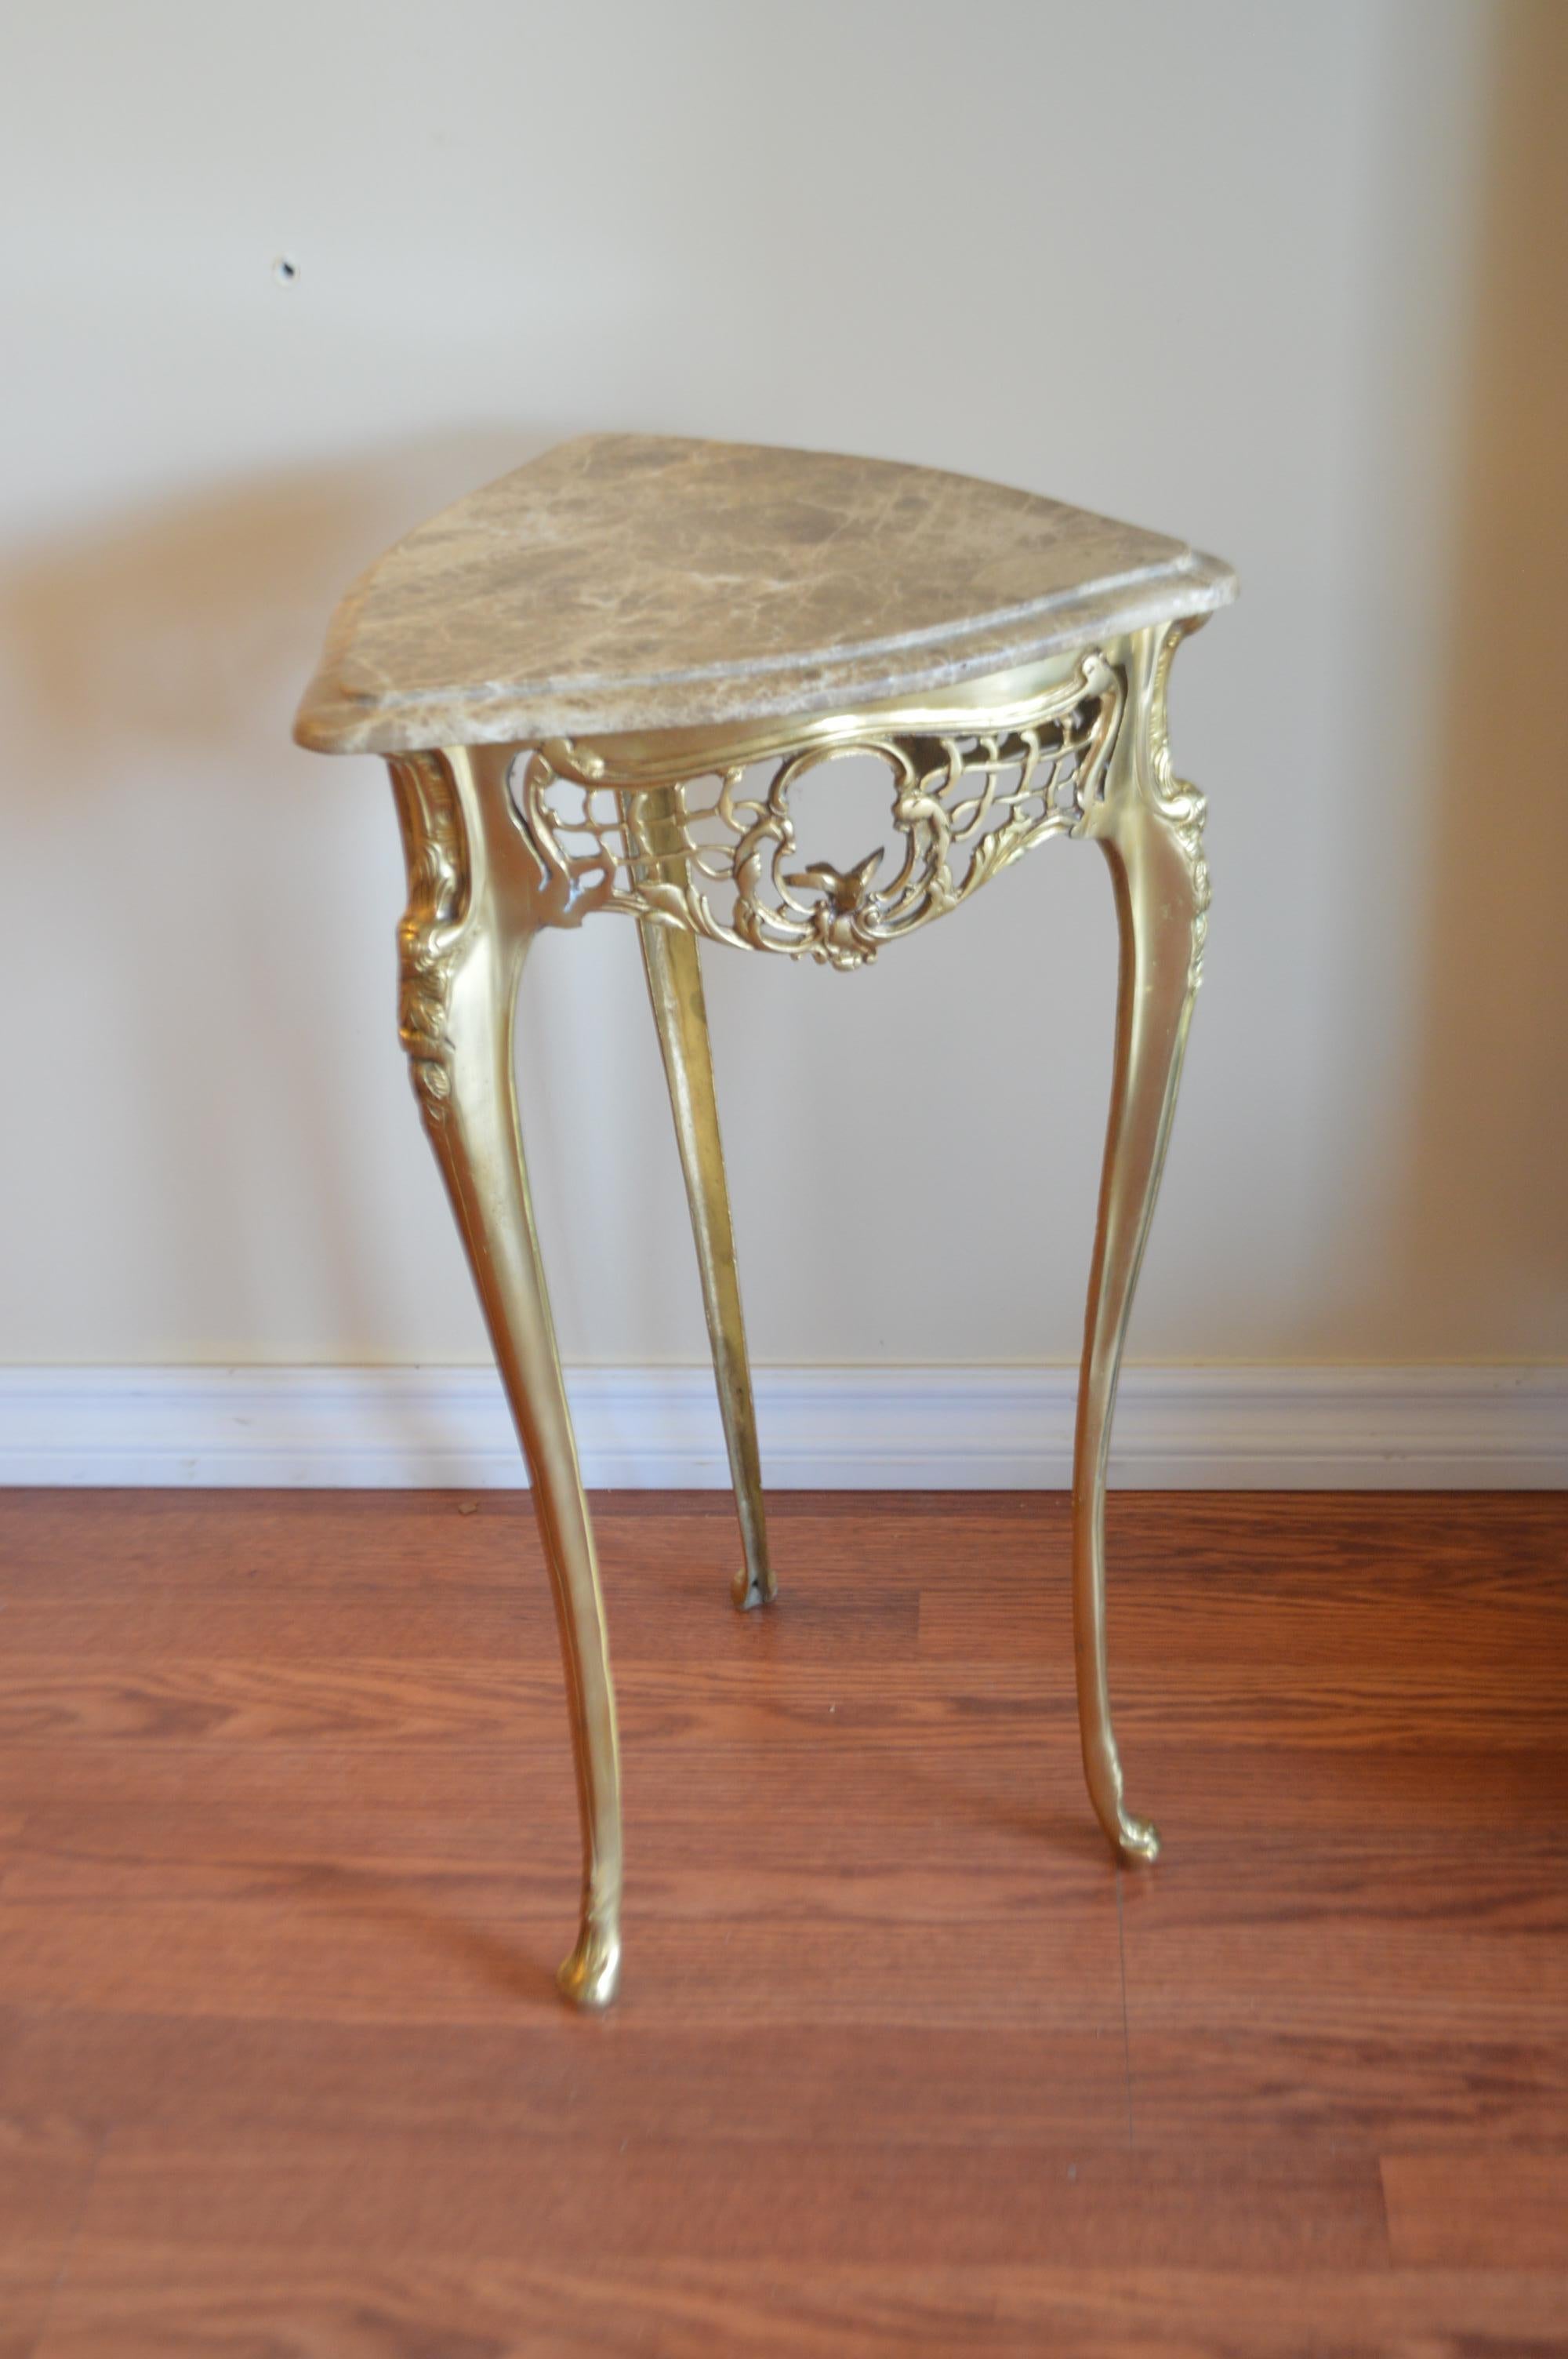 Most unusual pair of small side tables, triangle shape with attractive marble tops. The gilded bronze base is highly decorative with a lace design apron holding a small bird on each side of the table. The legs are fine and elegant.
The type of